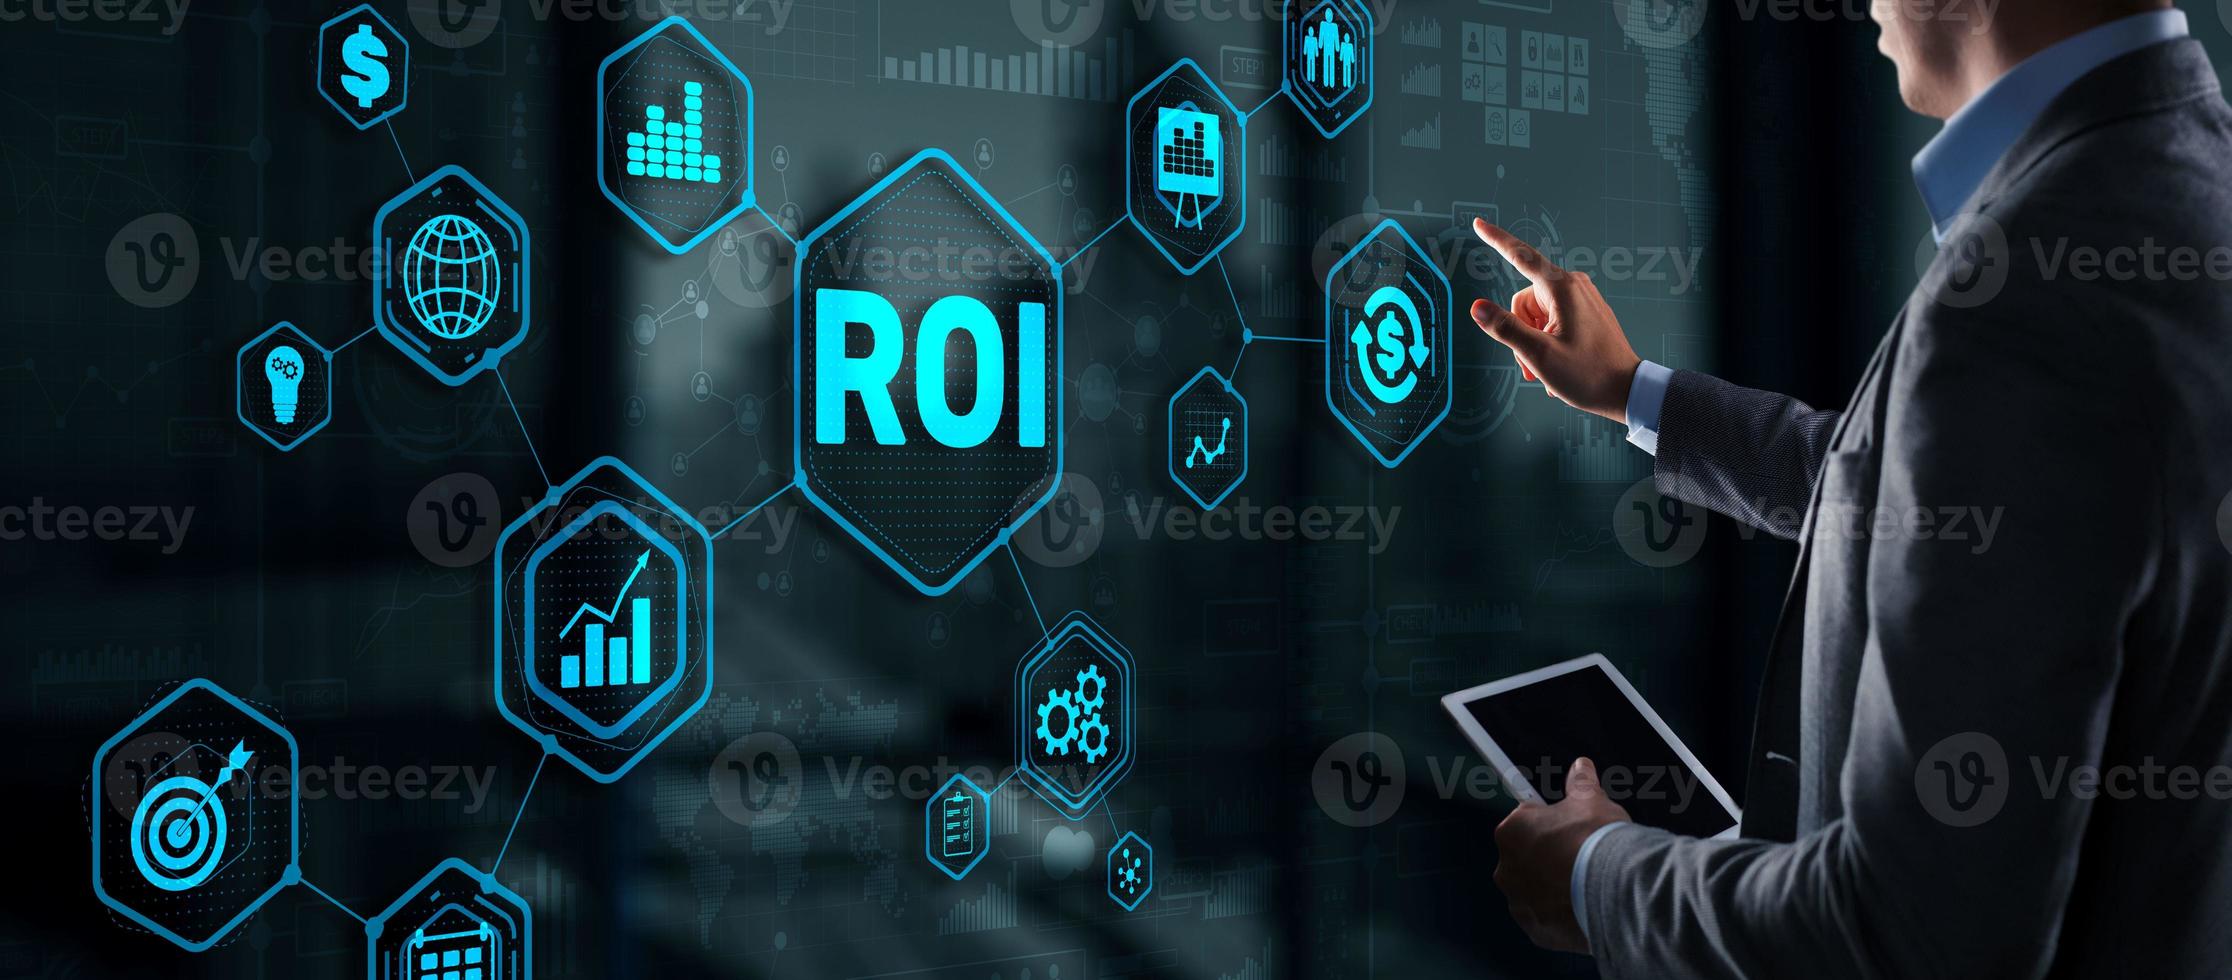 Roi Return On Investment Business Technology Analysis Finance Concept. photo